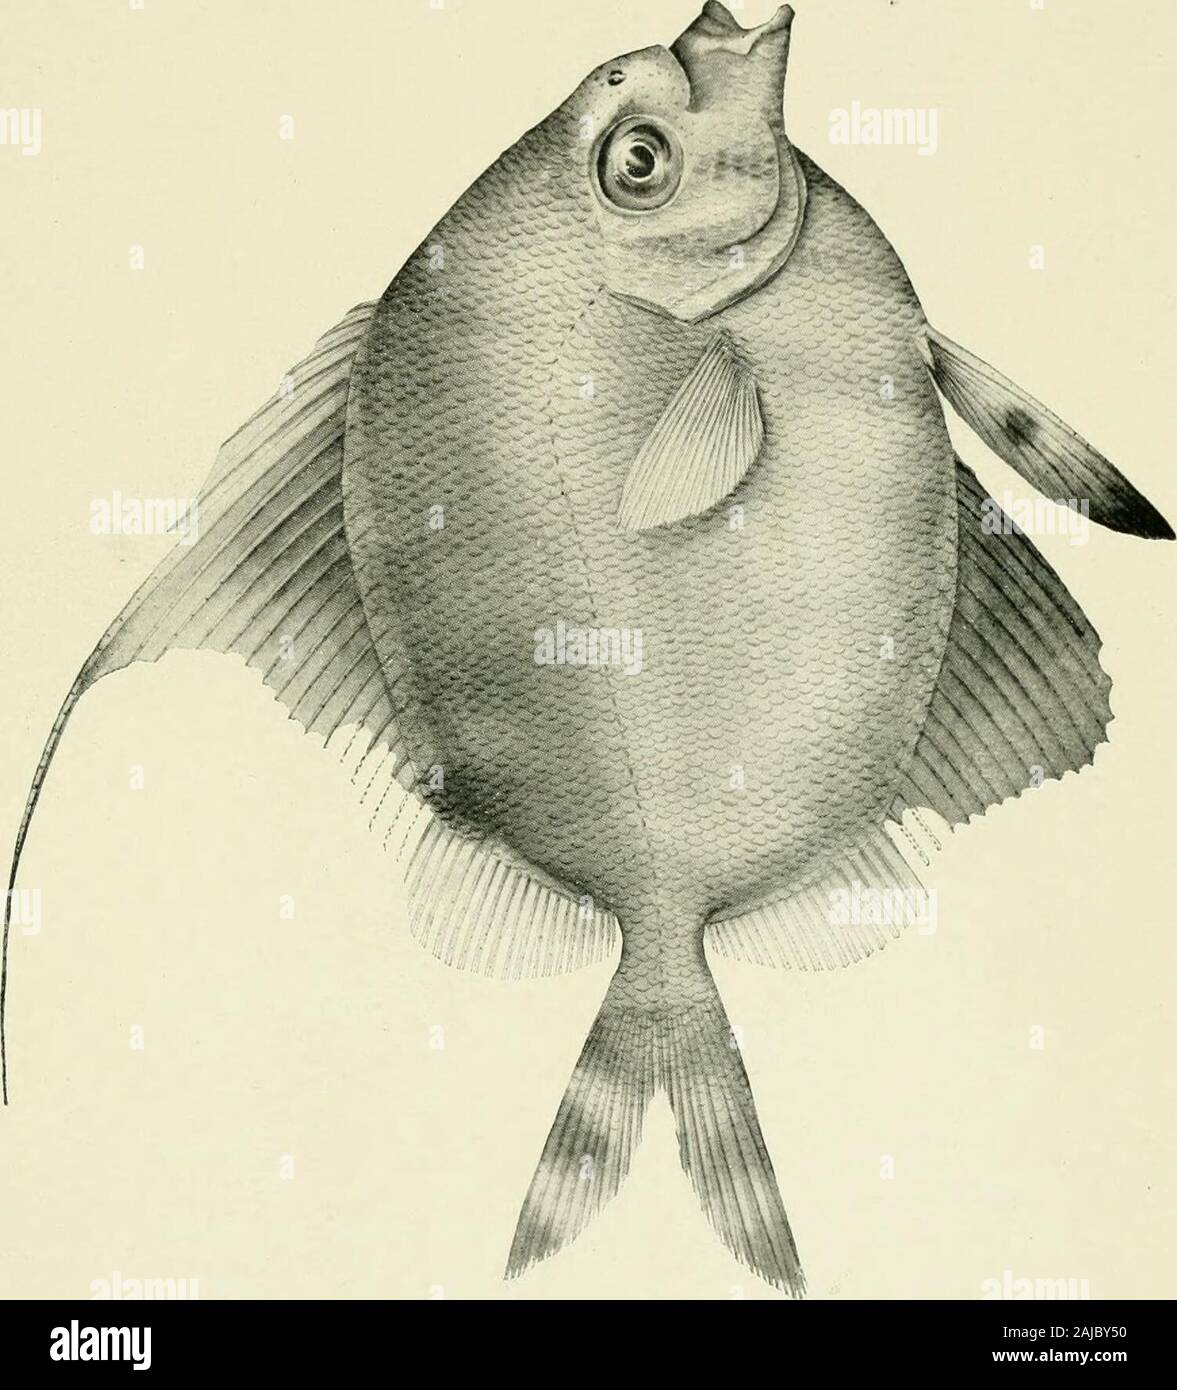 Zoological results of the fishing experiments carried on by F.I.S 'Endeavour,' 1909-14 under H.C Dannevig, commonwealth director of fisheries Volume 1-5 . .• P. Clarke, del., Austr. Miu. EXPLANATION OF PLATE XXIII. Velifer multiradiatus, Regan. ZOOL. RESULTS ENDEAVOUR, Vol. II. Platk XXIII.. A. E.. McCulloch, del., Austr. Mus. EXPLANATION OF PLATE XXIVVsendorlwmhus multimaculatns, Giinther. ZOOL. RESULTS ENDEAVOUR, Vol. II. Platk XXIV. Stock Photo